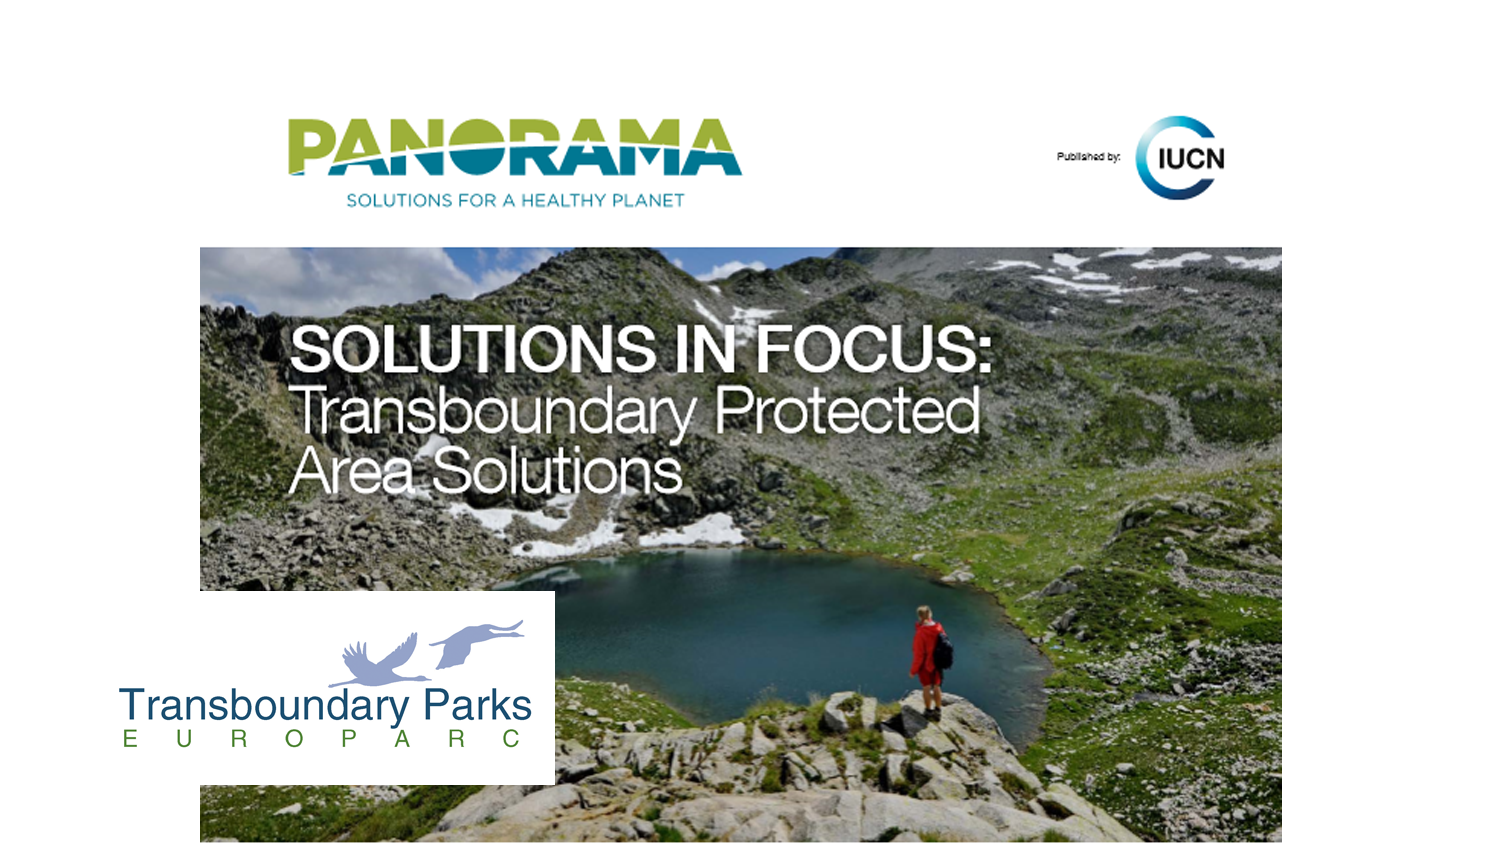 Transboundary Parks Programme on Panorama Solutions